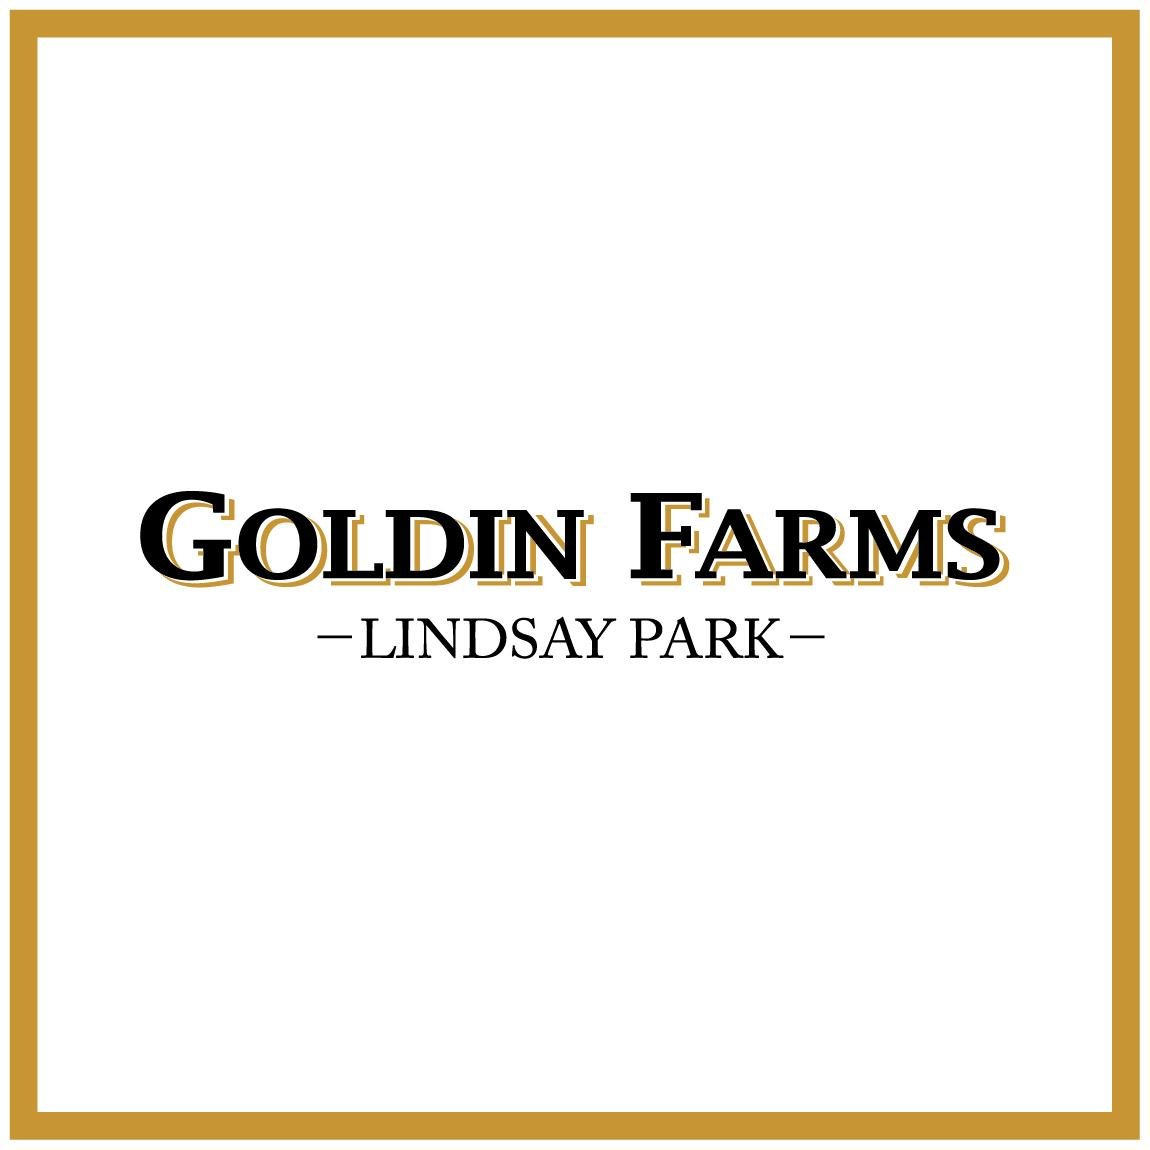 Esteemed horse breeding & training ground in South Australia established in 1965 by legendary trainer Colin Hayes and acquired by Goldin Group in 2013